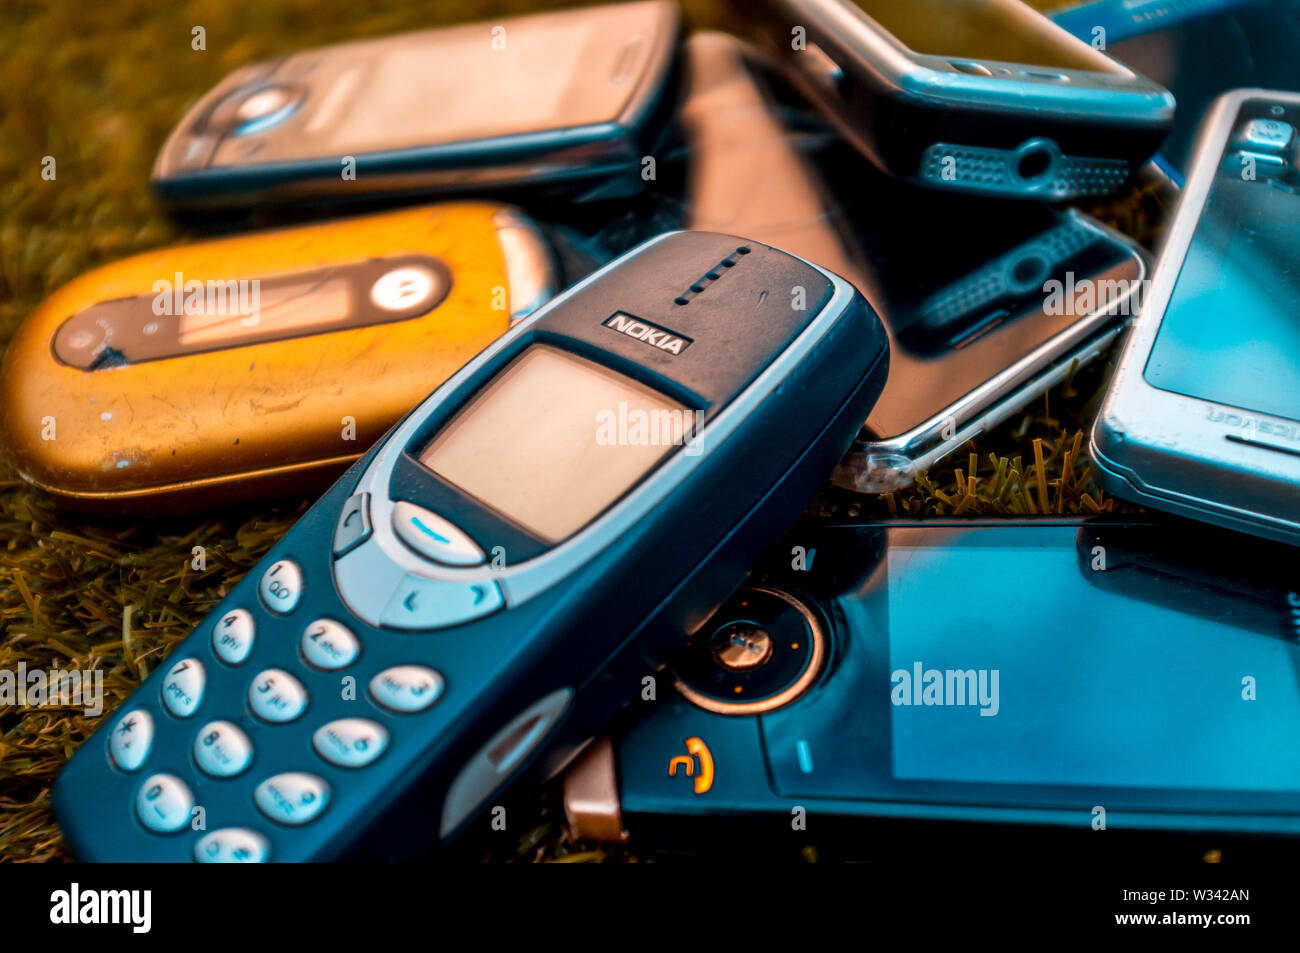 Selection of old mobile cell phones from the mid 2000's before the introduction of Smartphones Stock Photo